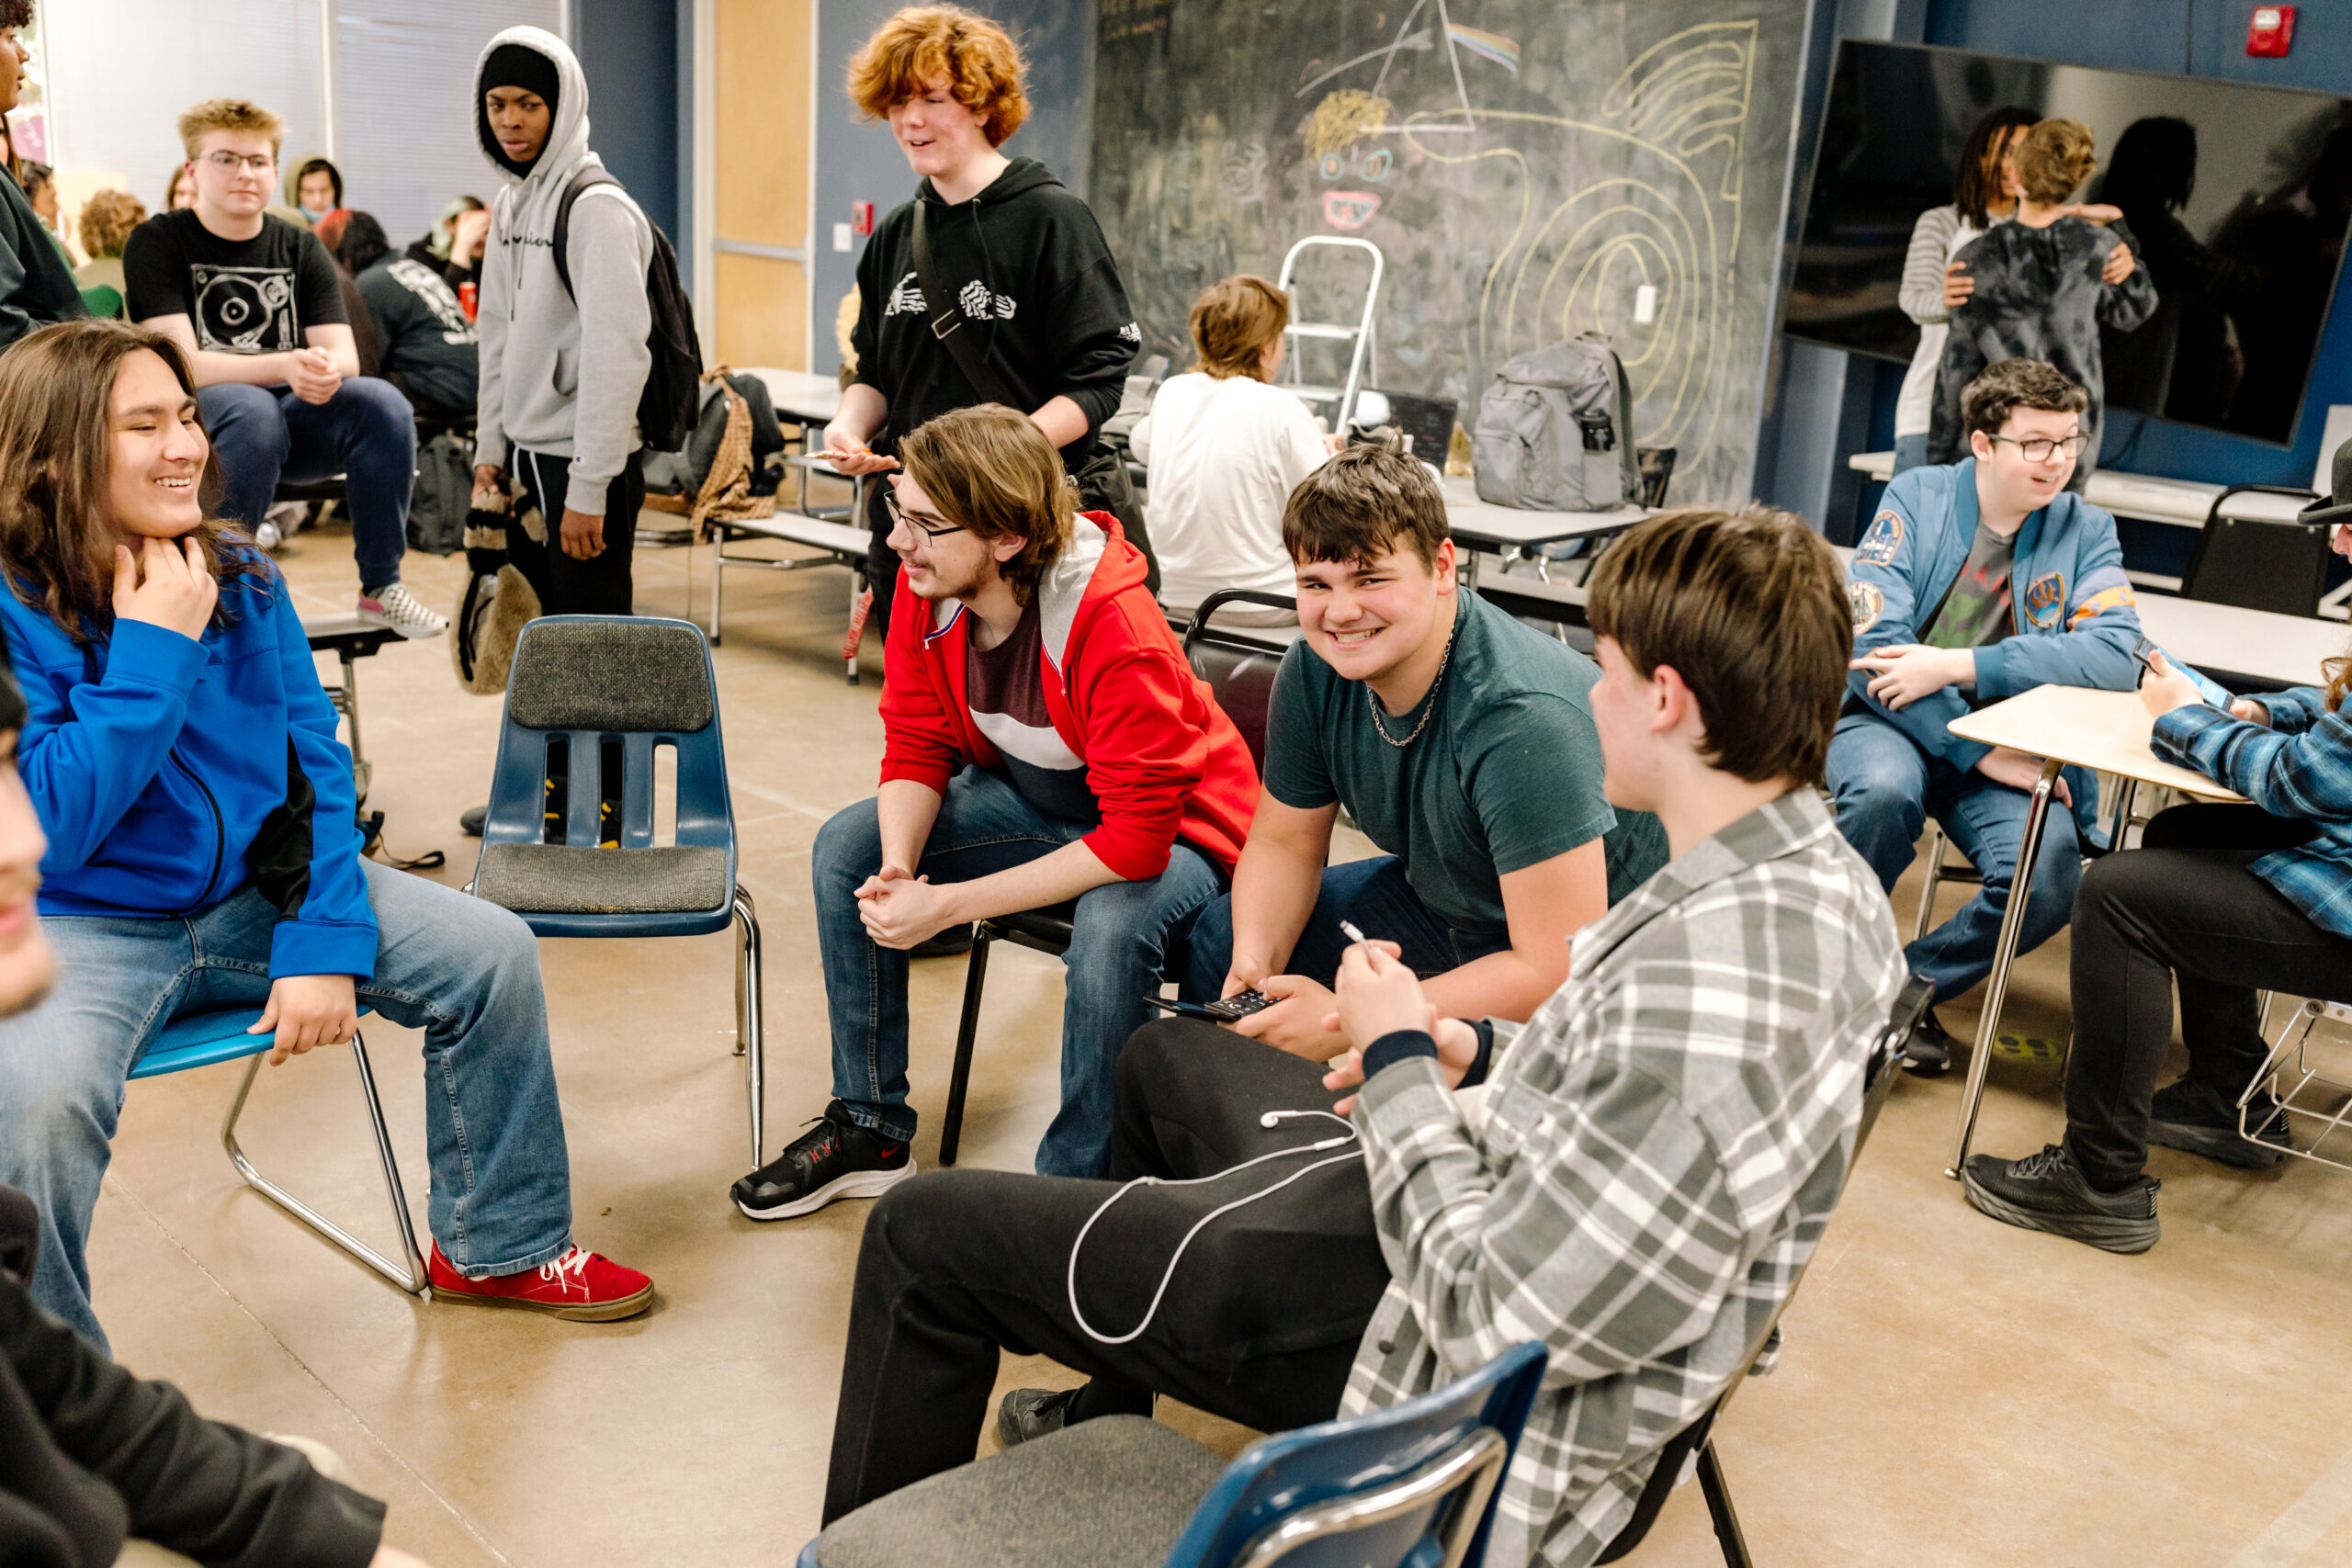 A group of SET High students chat while sitting in chairs in a circle with other students milling around behind them.